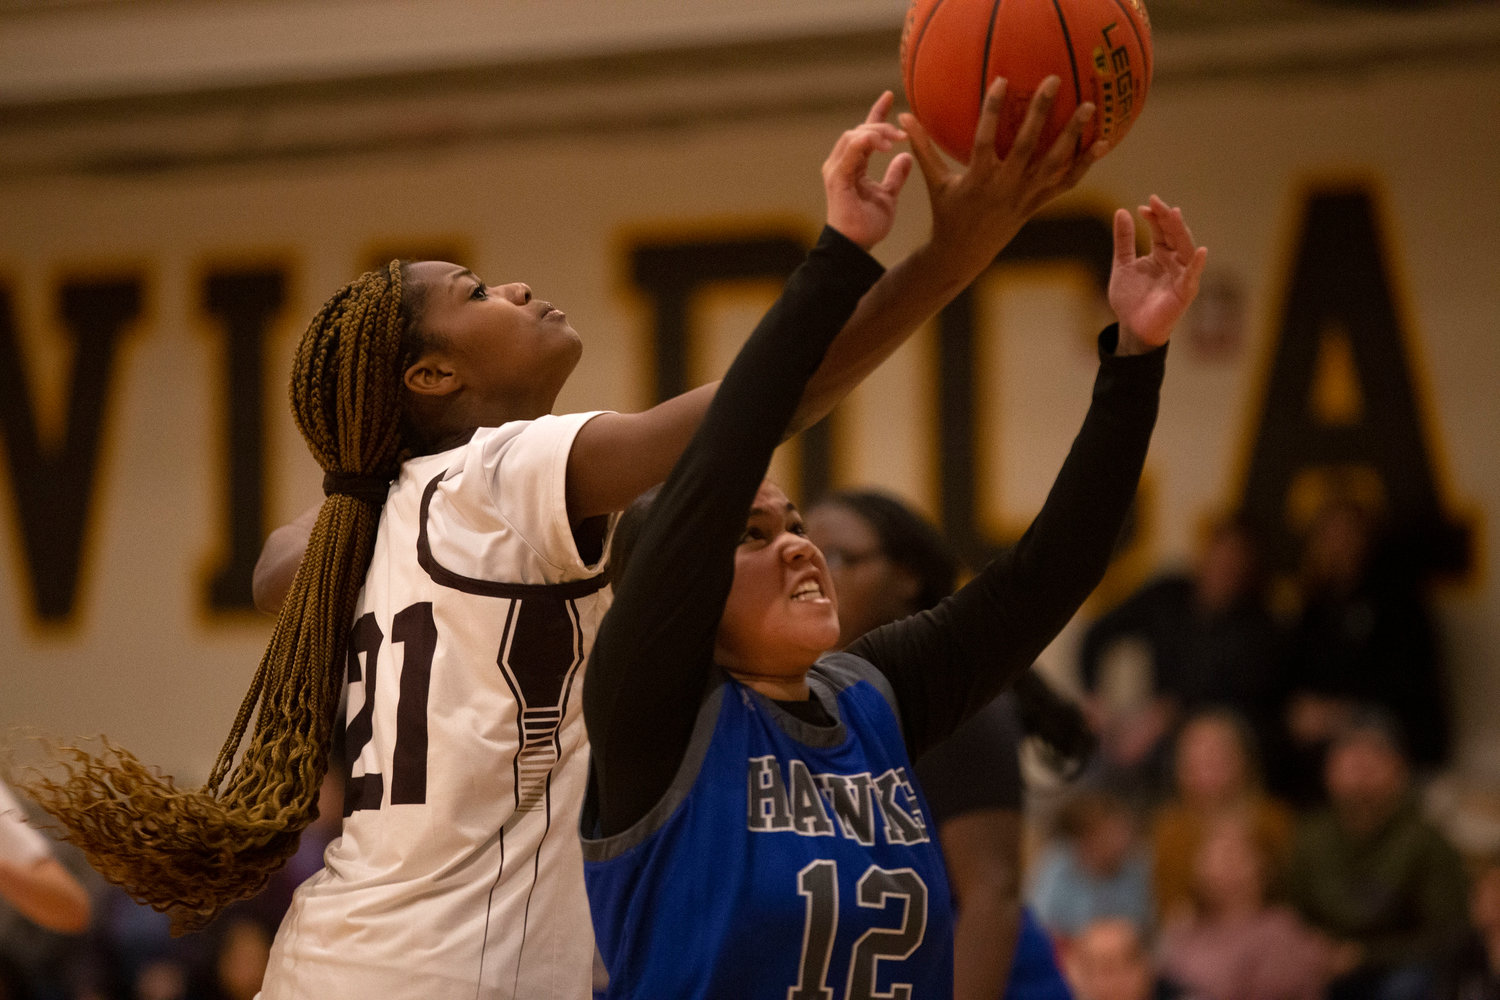 Sophomore center Jenna Egbe has added a strong inside presence since coming back to the team. She pulled down 11 rebounds and scored 5 points at Wareham and scored 12 points against Holbrook.